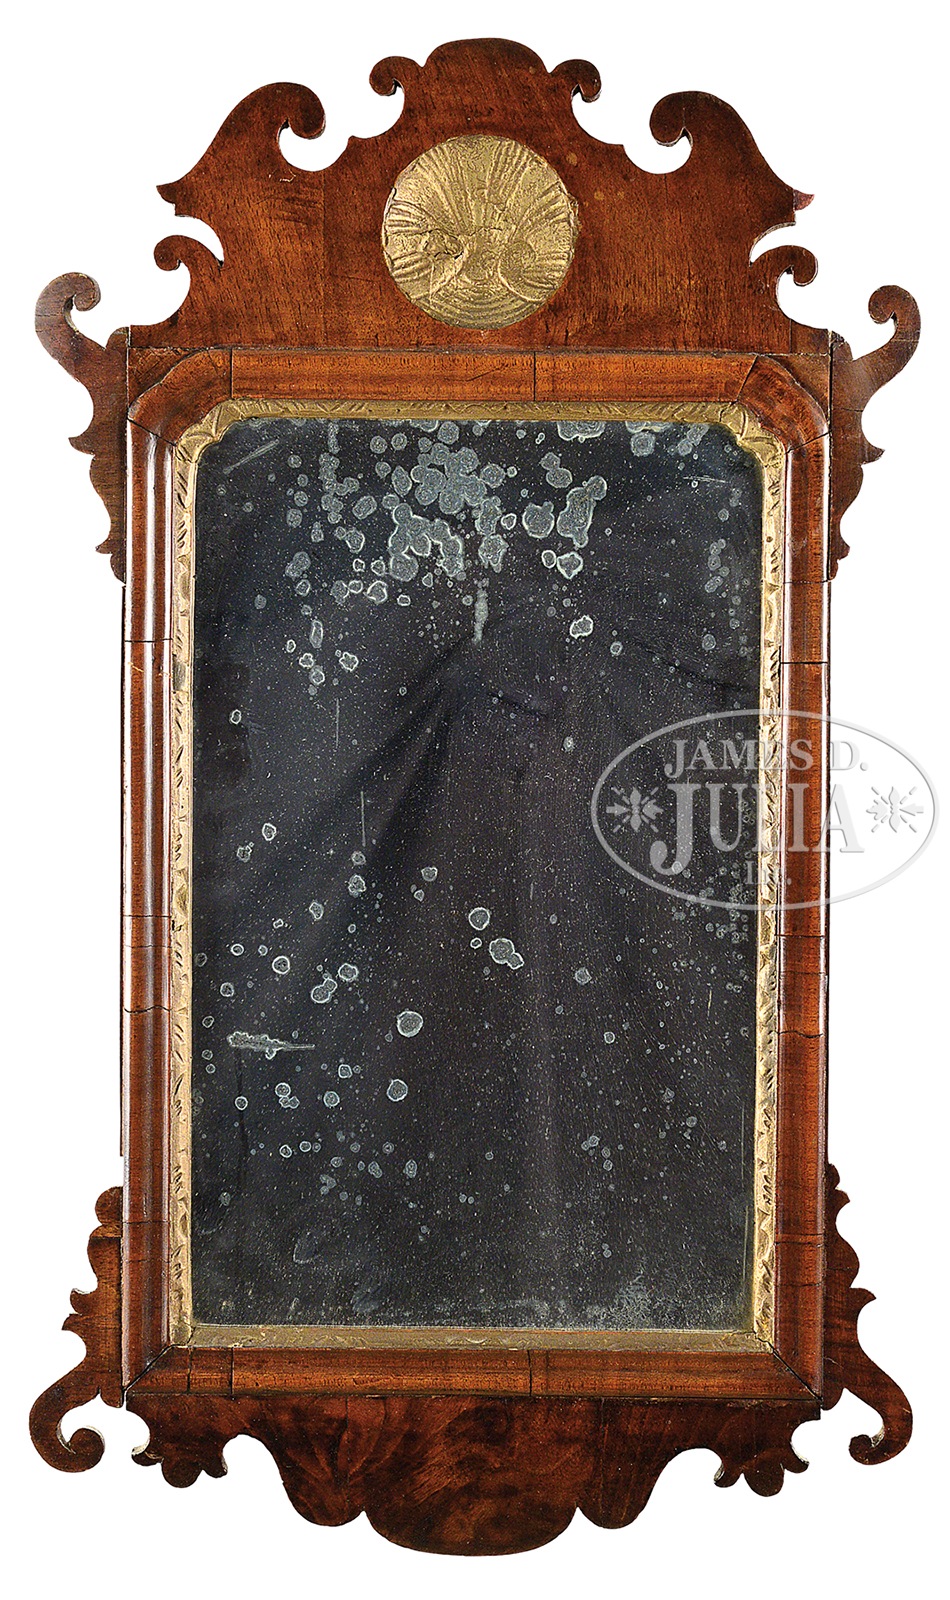 CHIPPENDALE MAHOGANY MIRROR. Late 18th century, American. The rectangular mirror plate within a